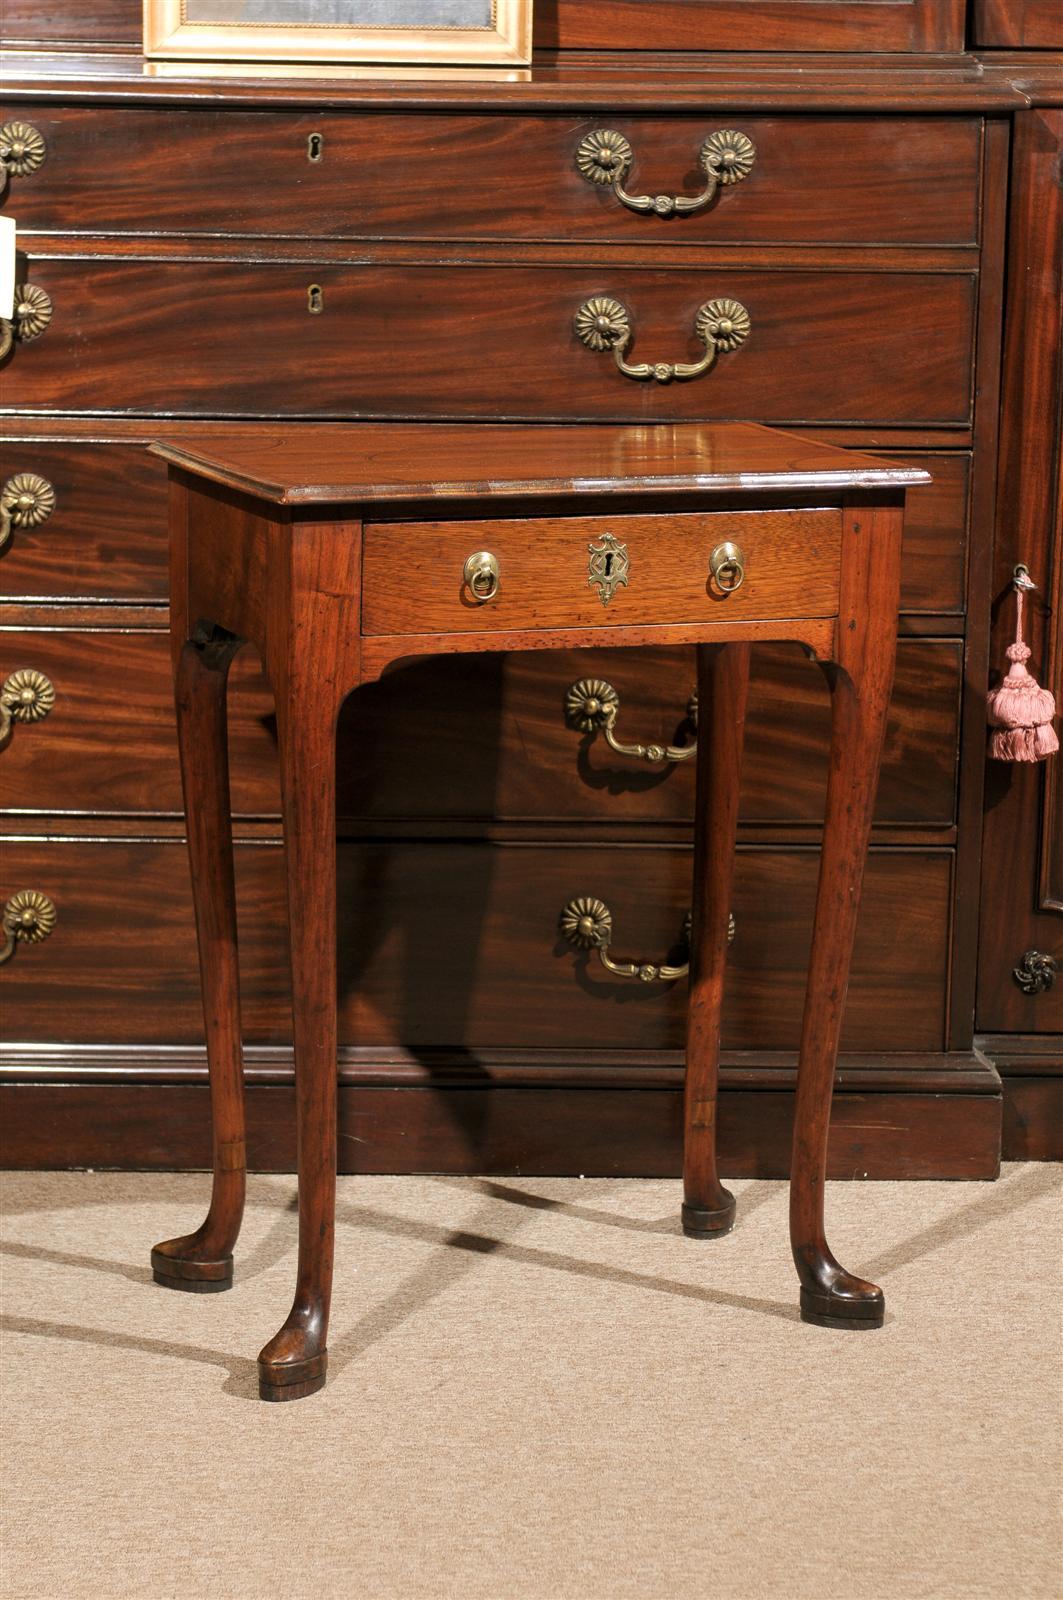 A charming 18th century English Queen Anne table with inlaid top, drawer and cabriole leg with pad foot.

To view our entire inventory, please visit our personal website.

William word fine antiques: Atlanta's source for antique interiors since